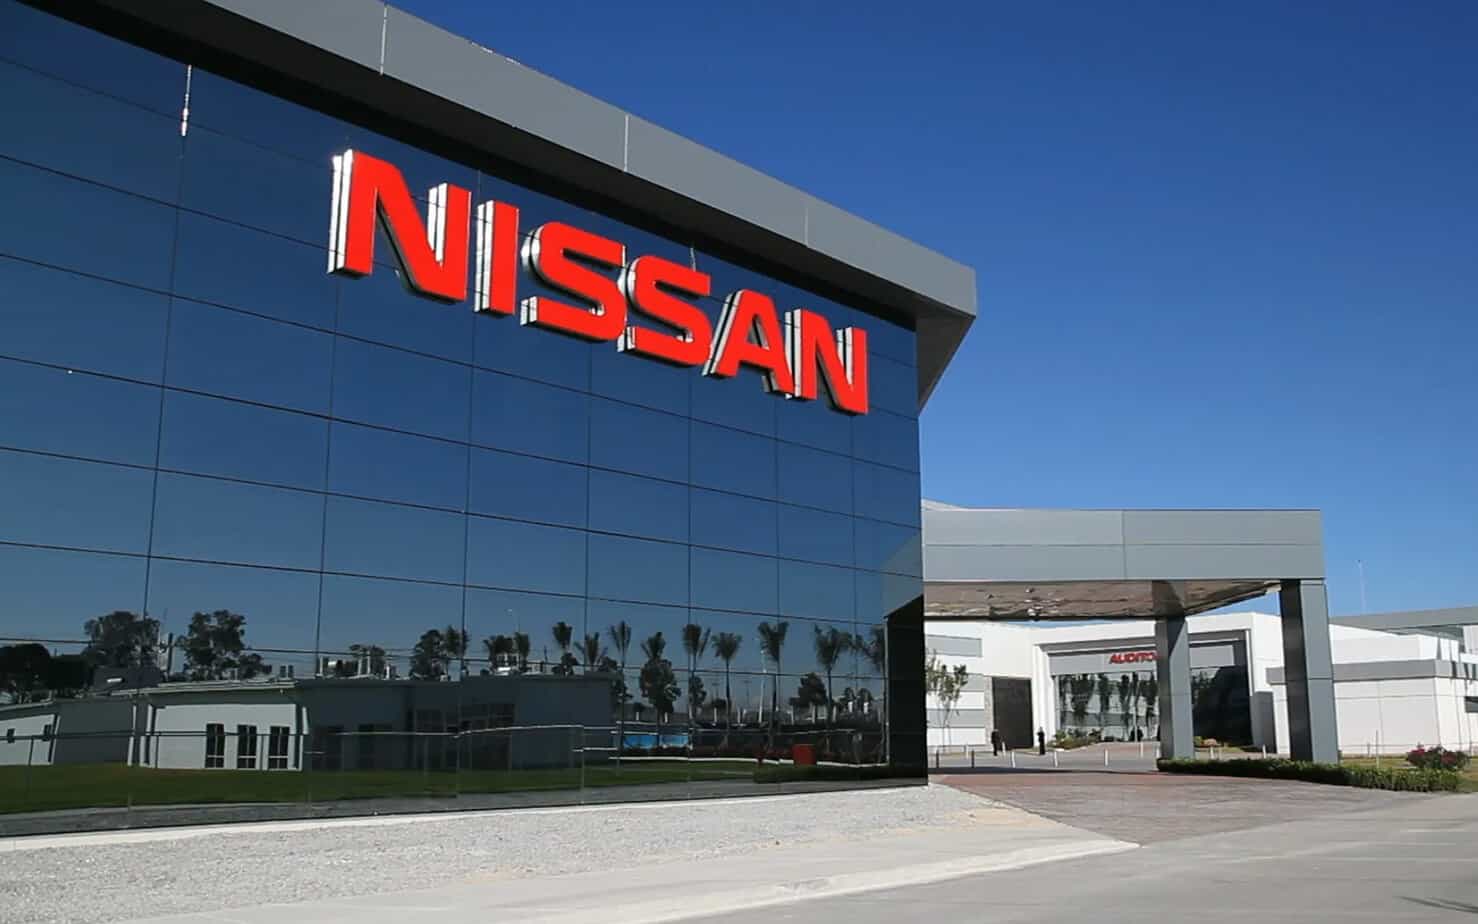 Nissan To Cut Over 10,000 Jobs Globally